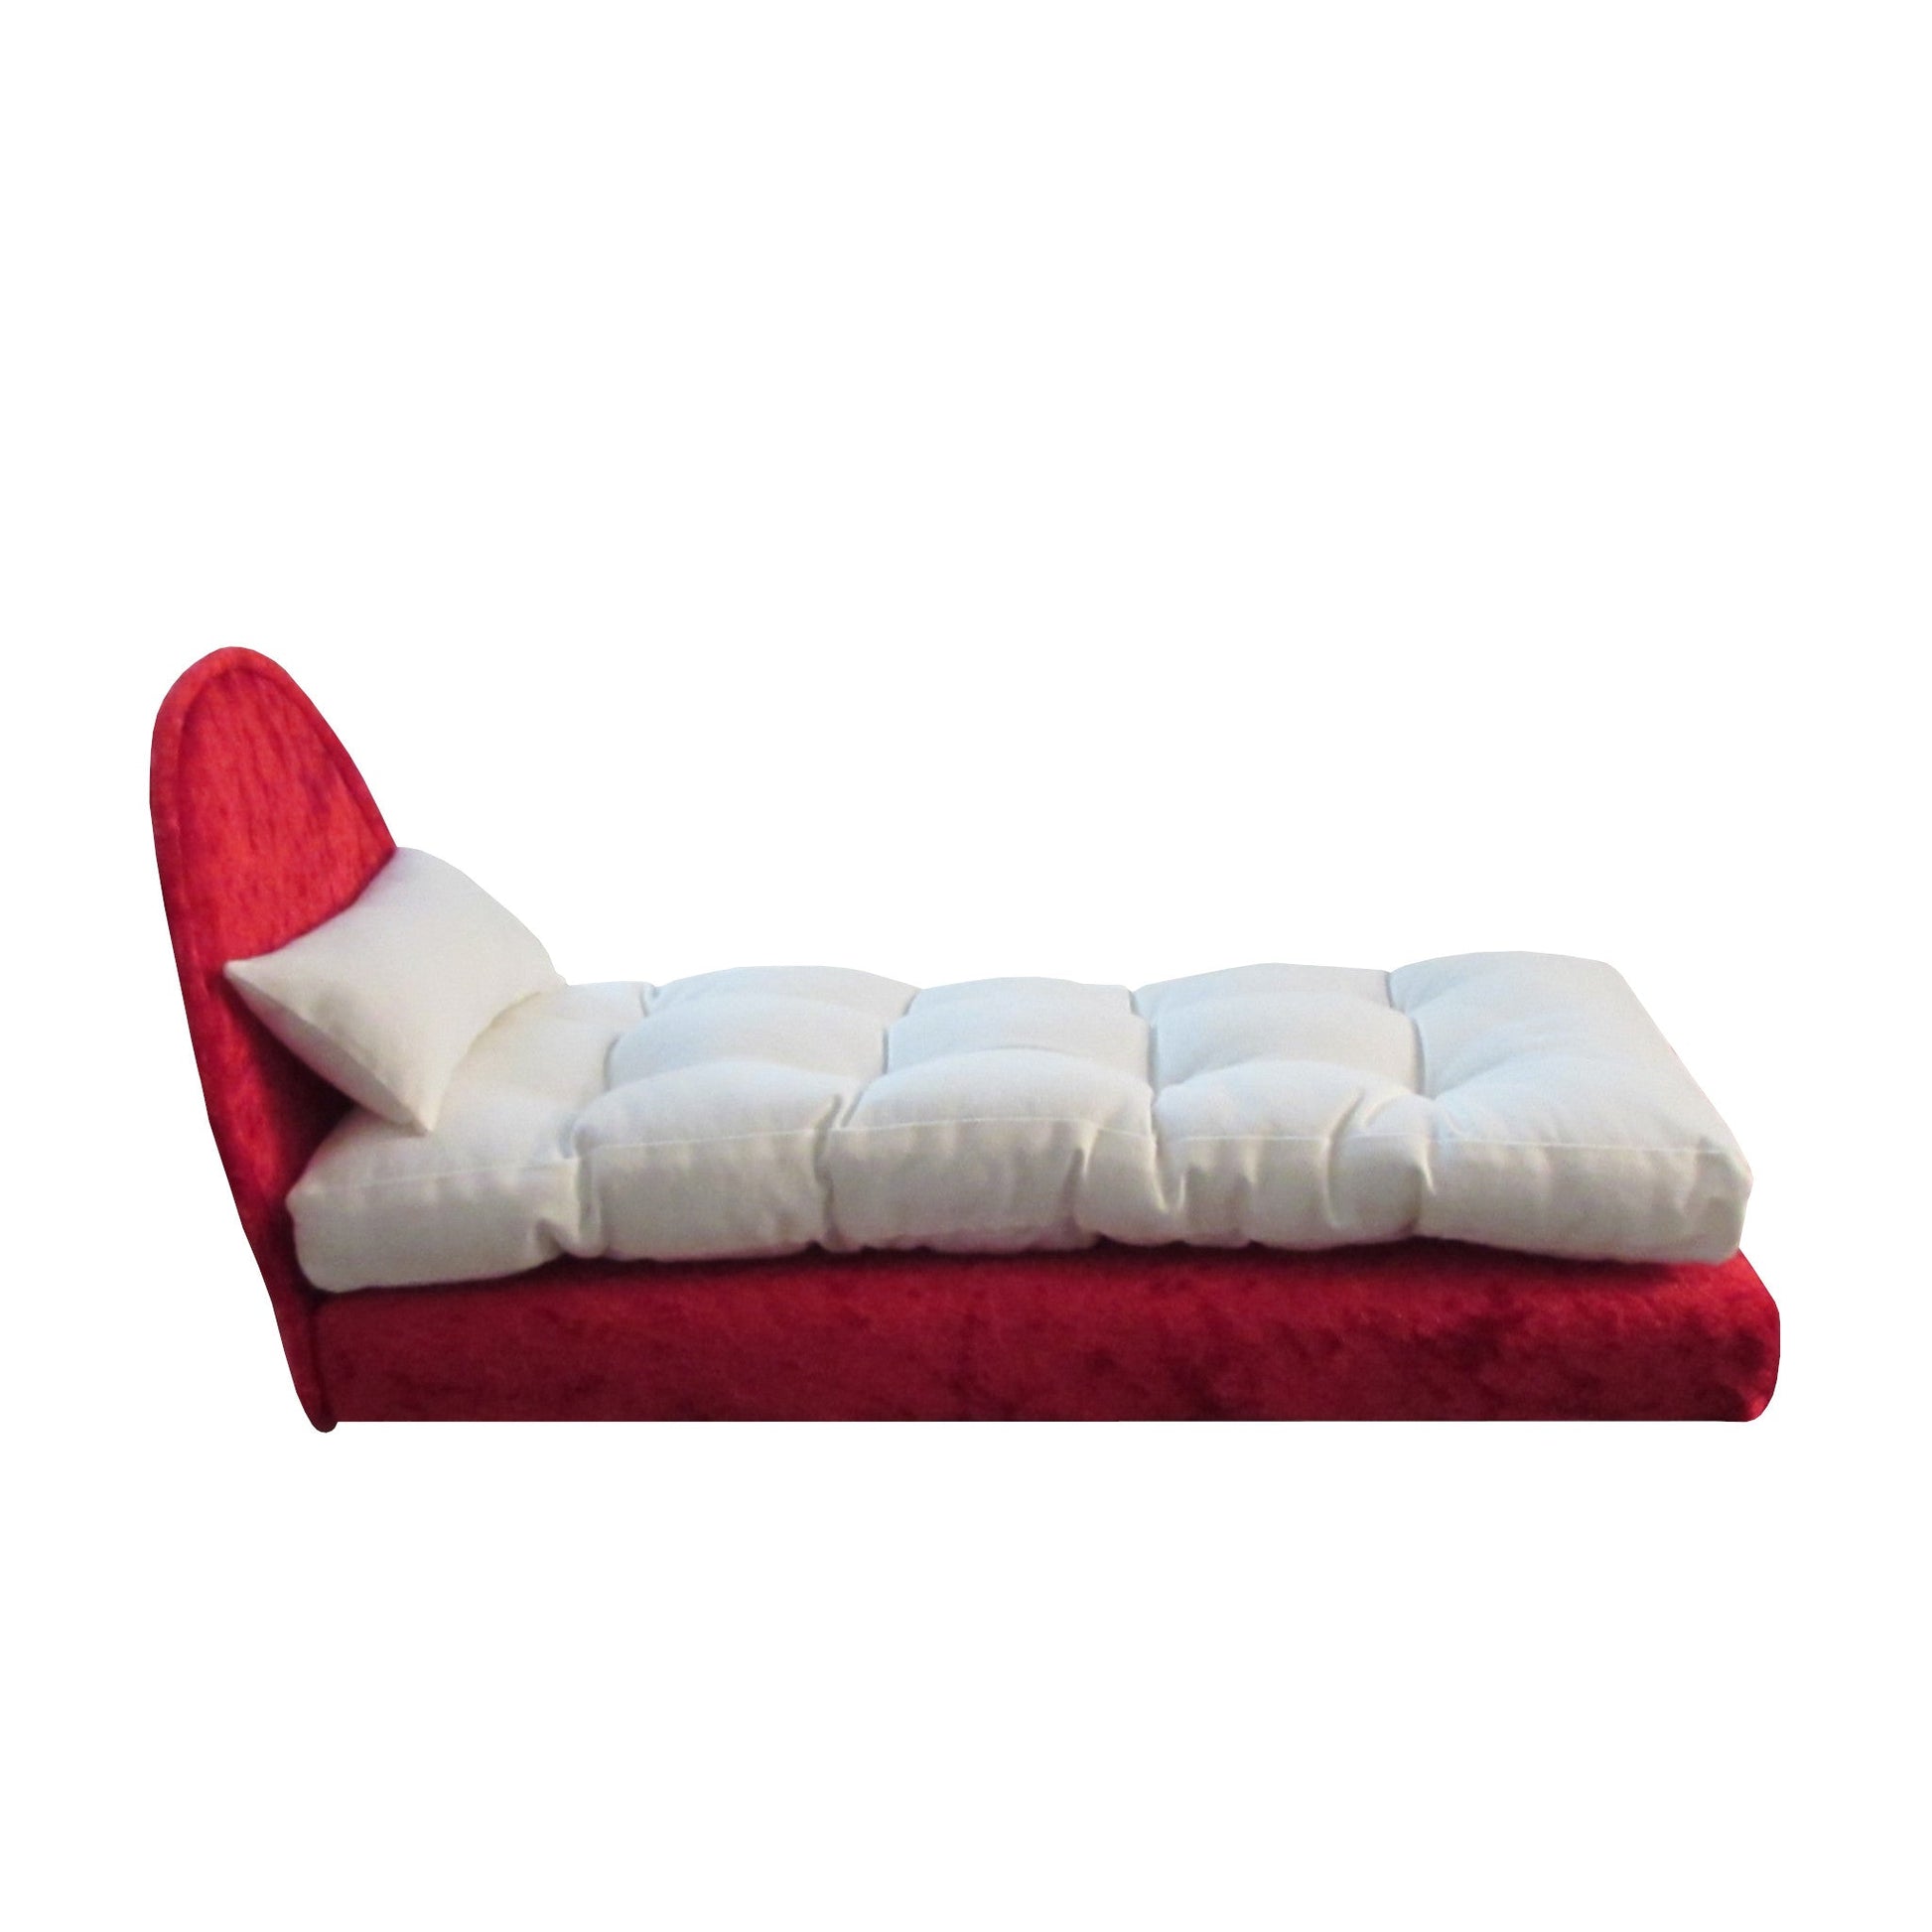 Red Crushed Velvet Doll Bed, Pillow, and Mattress for 11.5-inch and 12-inch dolls